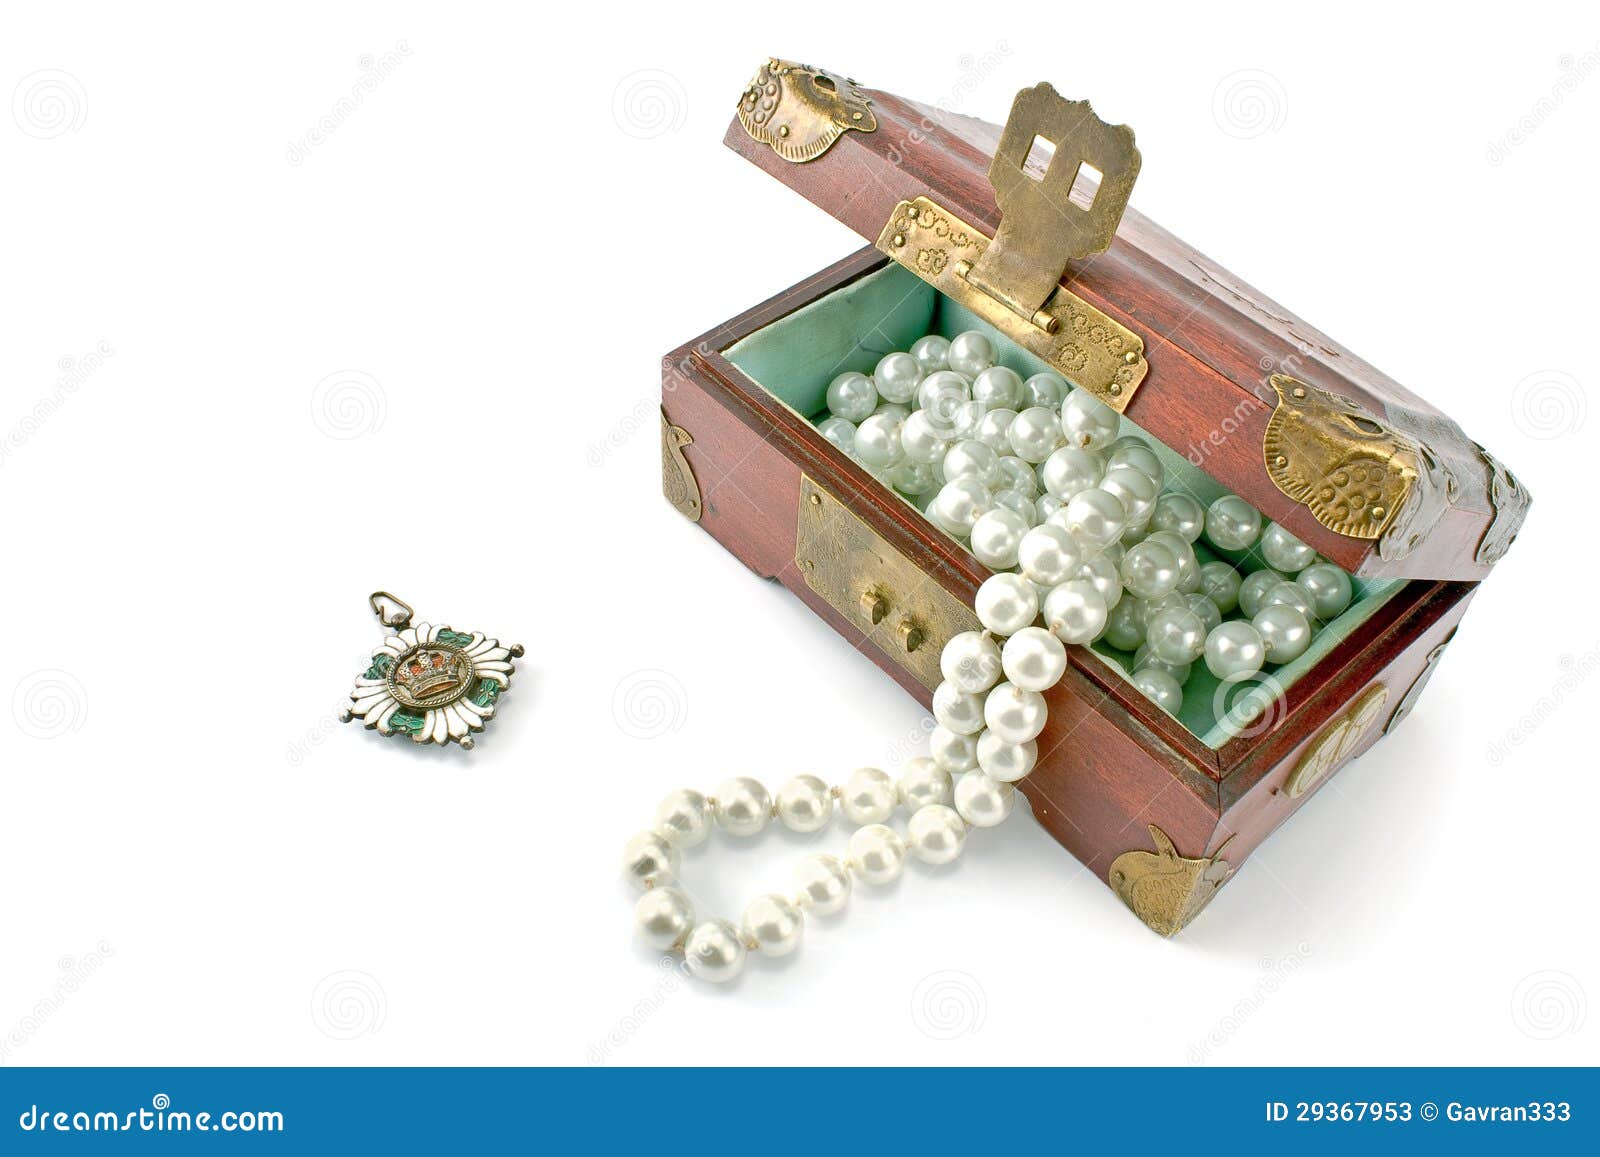 Wooden Treasure Chest With Jewelry Stock Photos - Image: 29367953